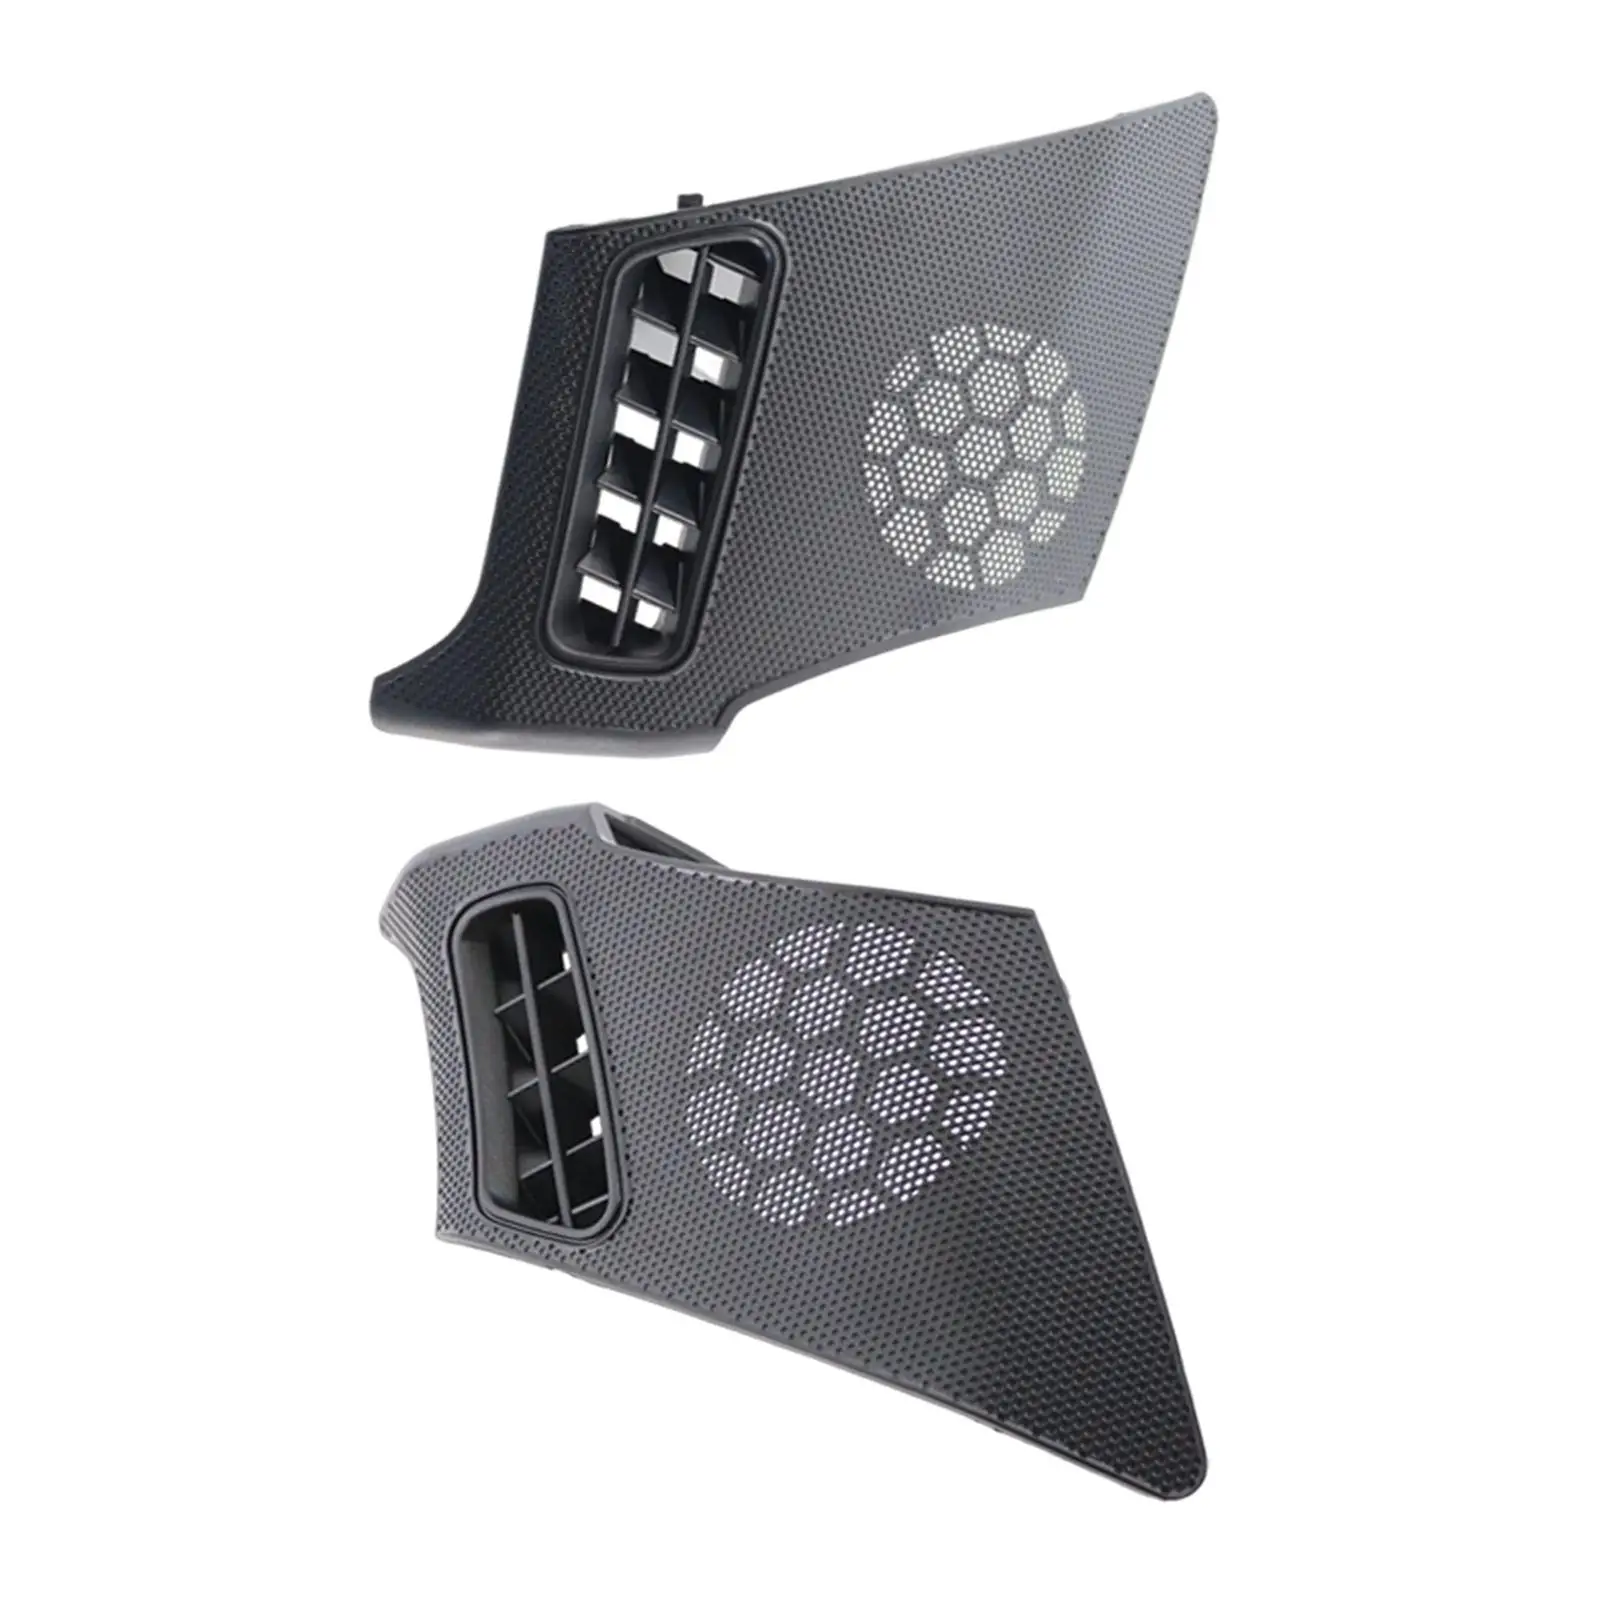 Car Vent Speaker Grill Covers Protective for car W210 E430 E55